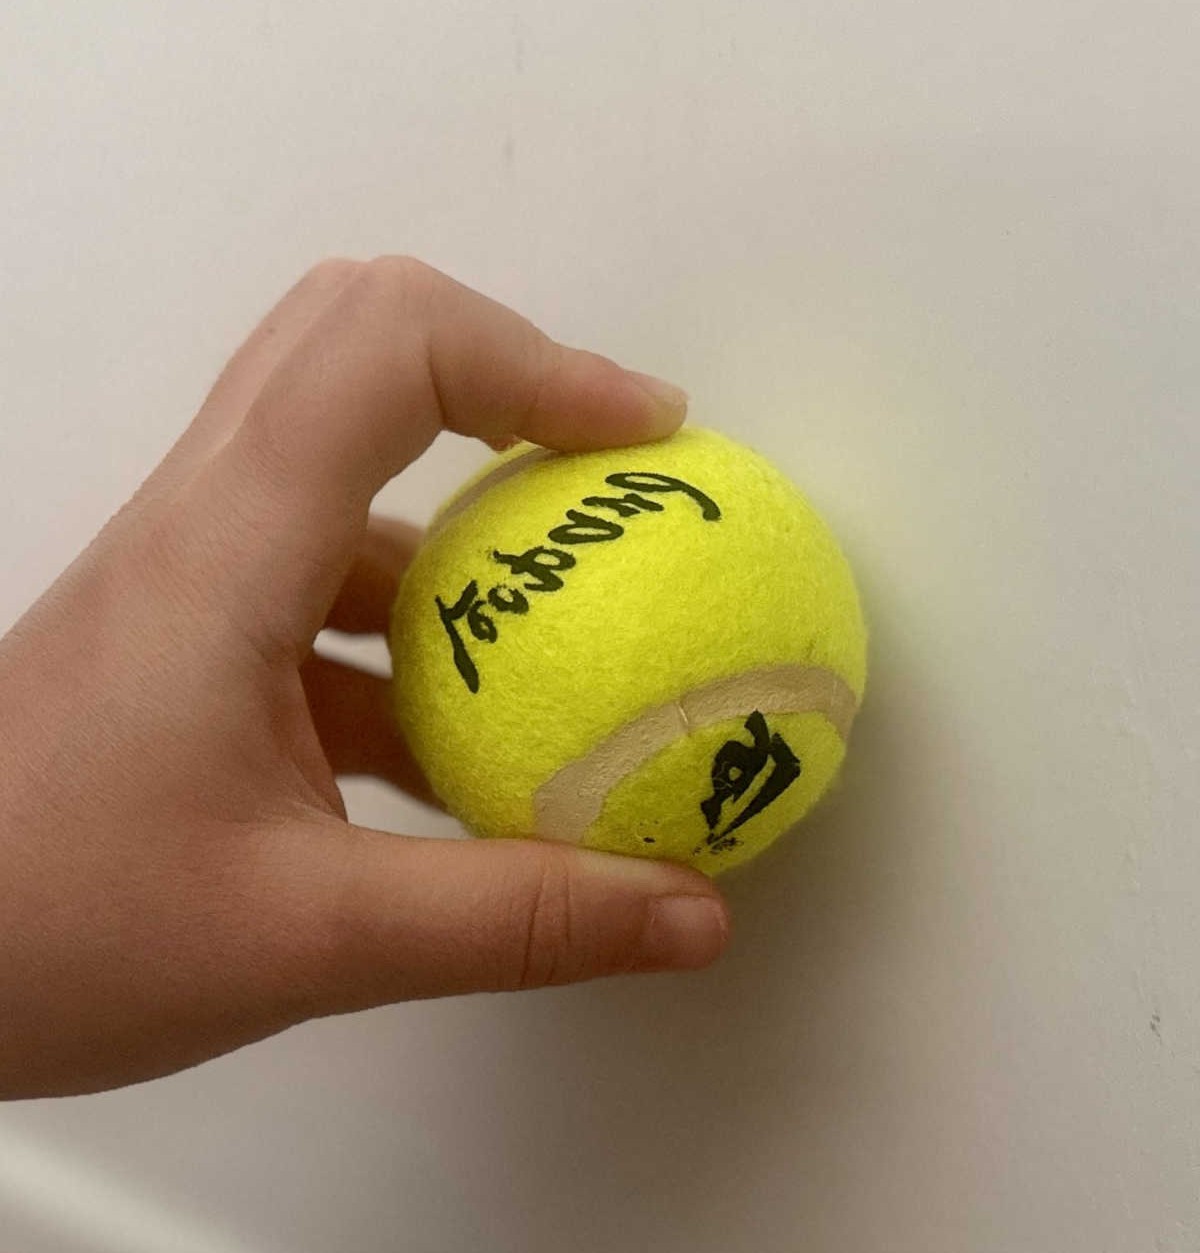 Use a Tennis Ball to Remove Stains on the Wall